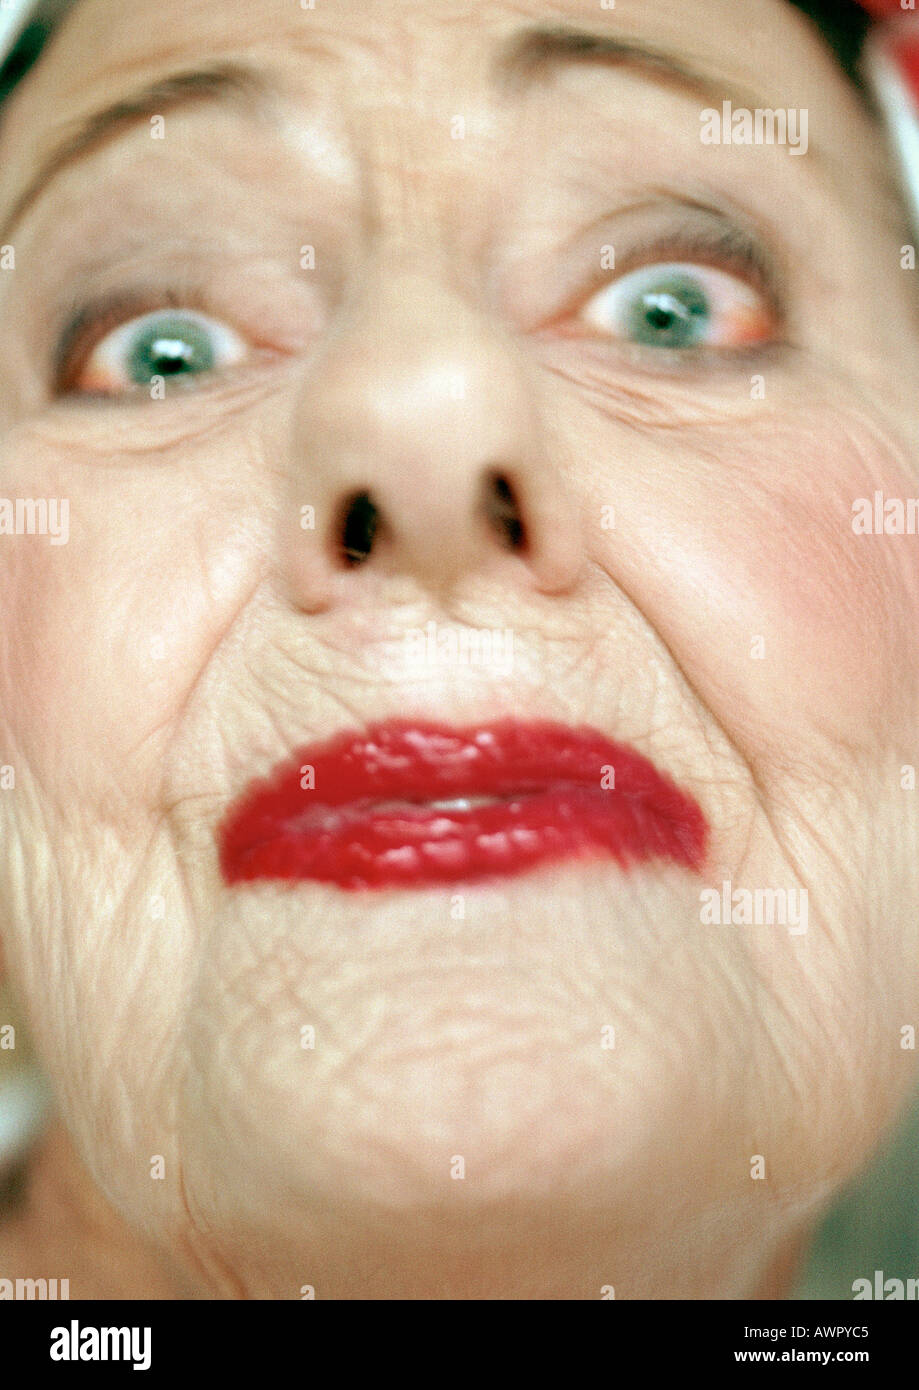 Senior woman wearing red lipstick looking at camera, portrait, extreme close-up Stock Photo